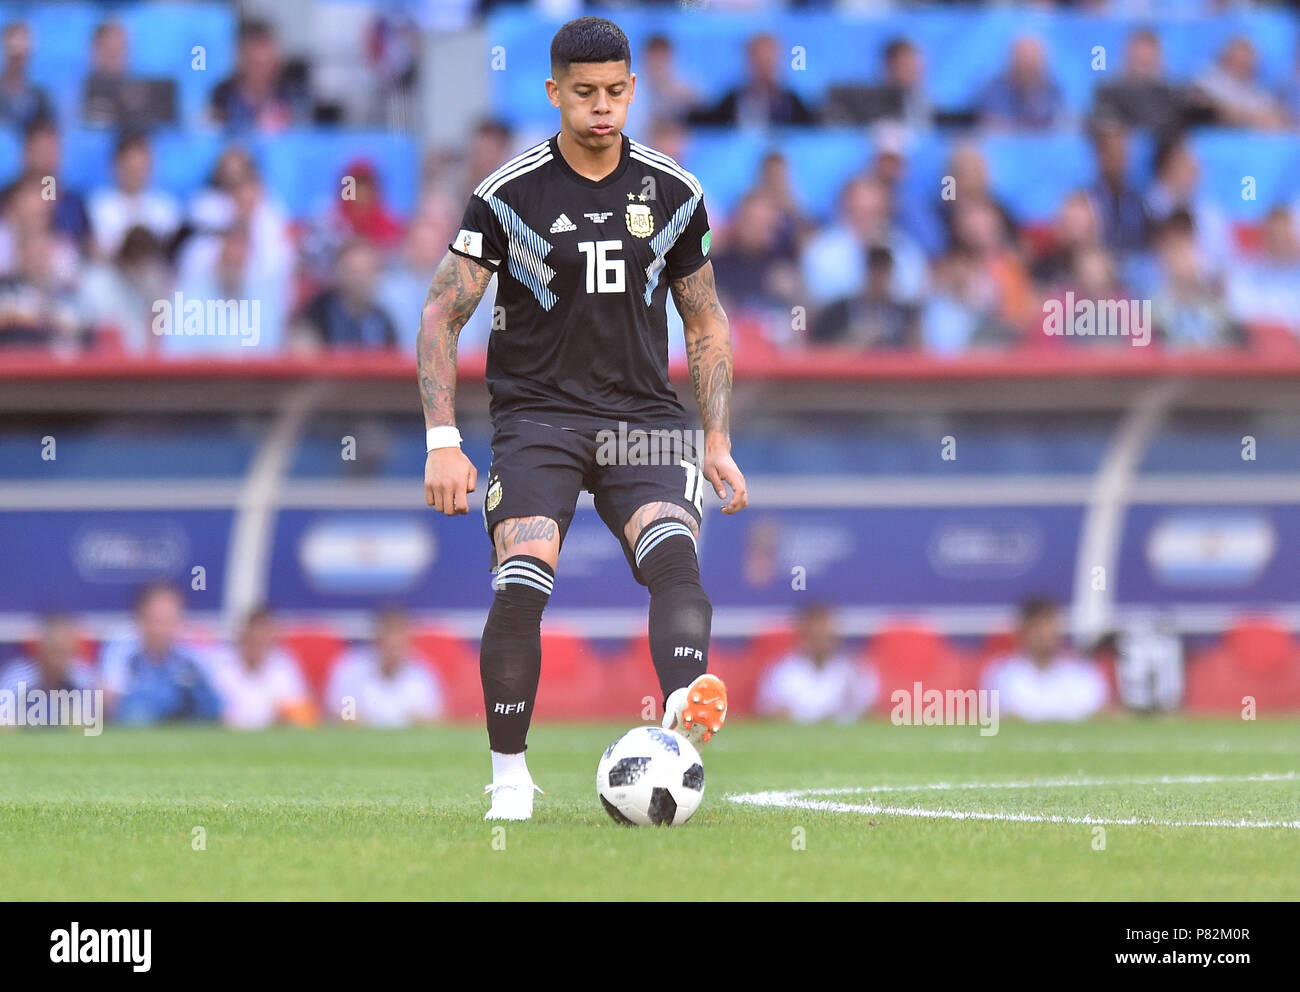 MOSCOW, RUSSIA - JUNE 16: Marcos Rojo of Argentina in action during the 2018 FIFA World Cup Russia group D match between Argentina and Iceland at Spartak Stadium on June 16, 2018 in Moscow, Russia. (Photo by Lukasz Laskowski/PressFocus/MB Media) Stock Photo